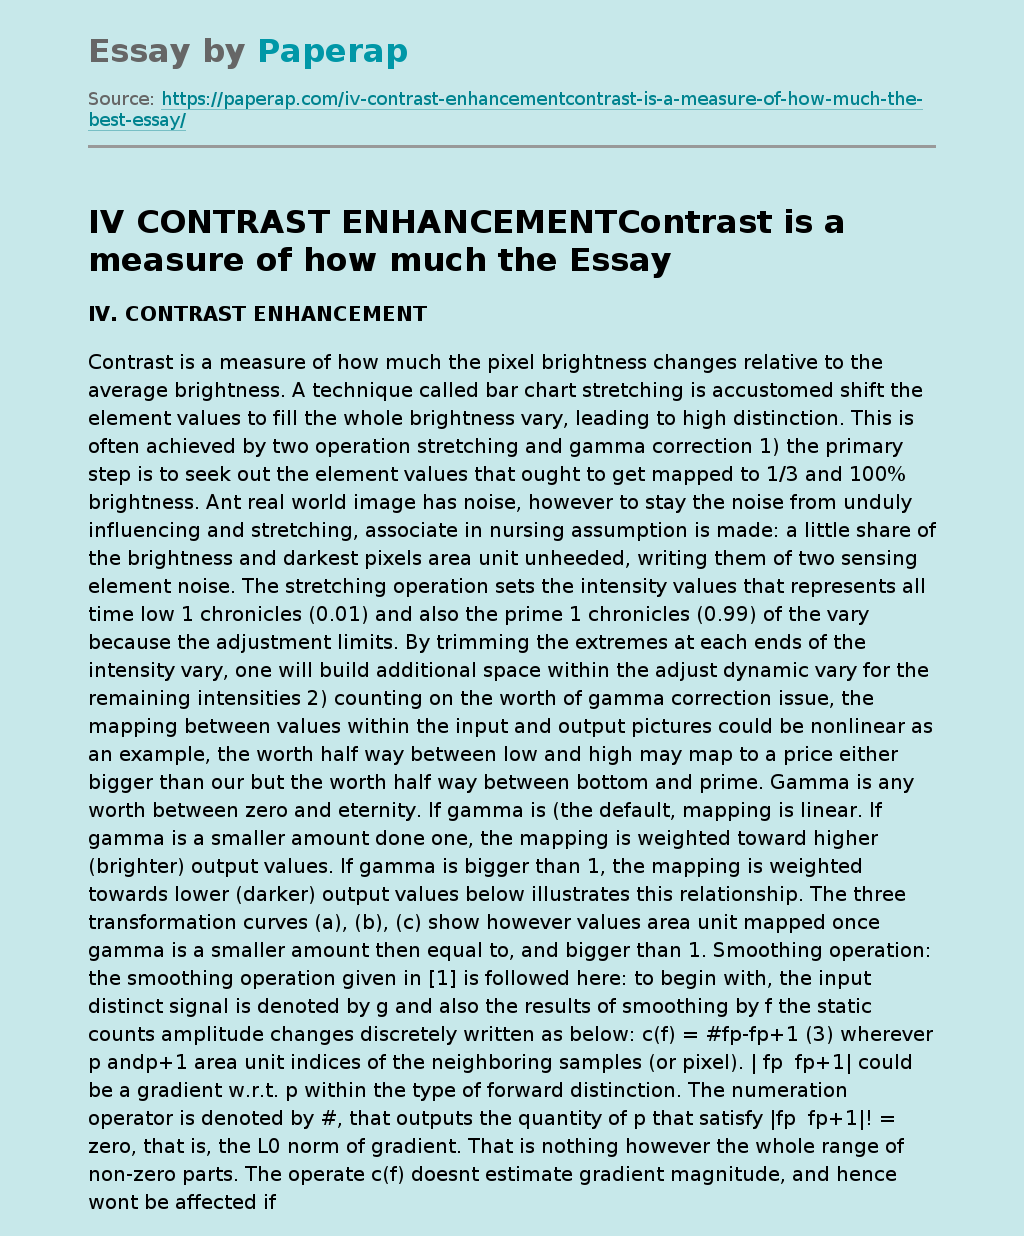 IV CONTRAST ENHANCEMENTContrast is a measure of how much the